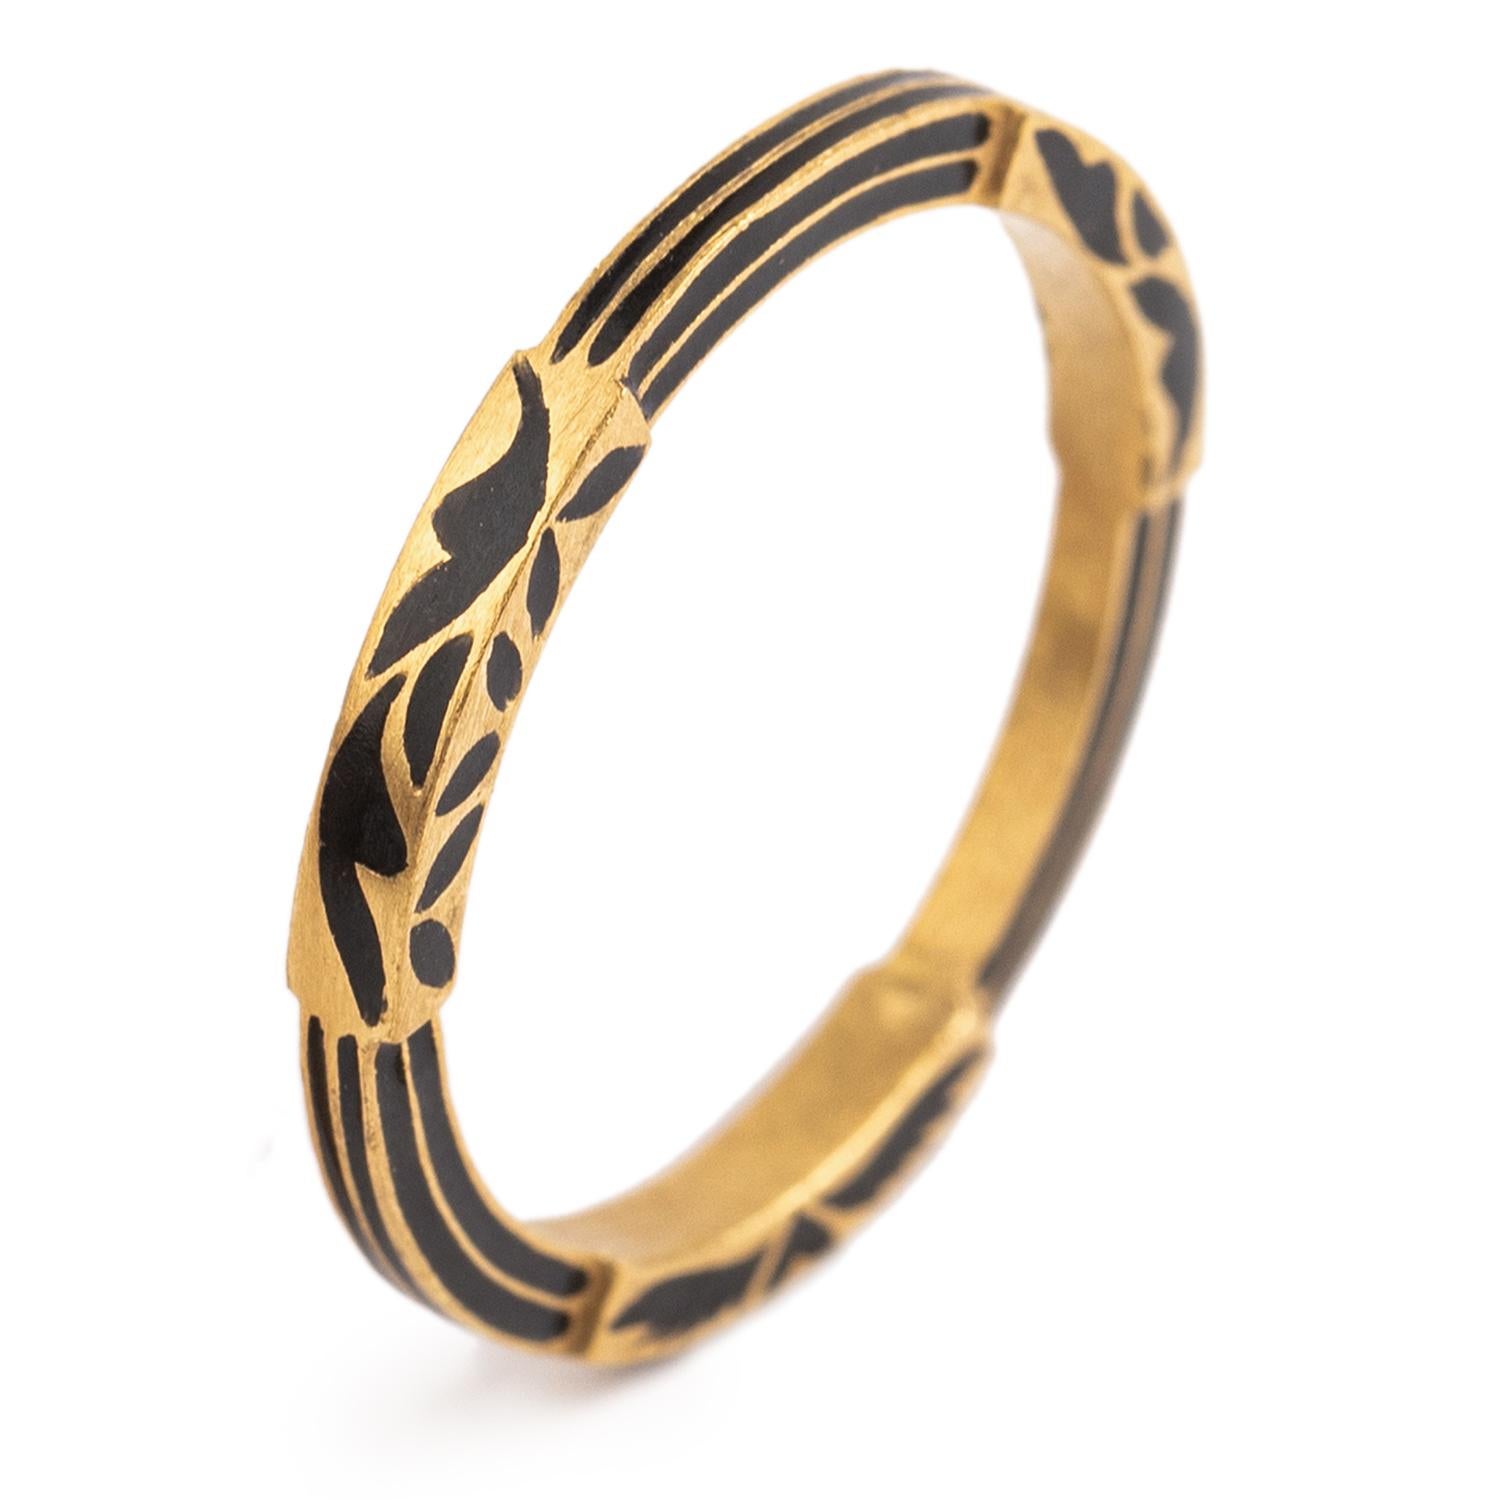 The sum of all sums is eternity..

This intricately hand engraved band, called the Silk Shadow Ring, is part of Agaro Jewels' Ananta collection. The collection is an exploration of infinity, a journey into subtle space that intertwines with delicate